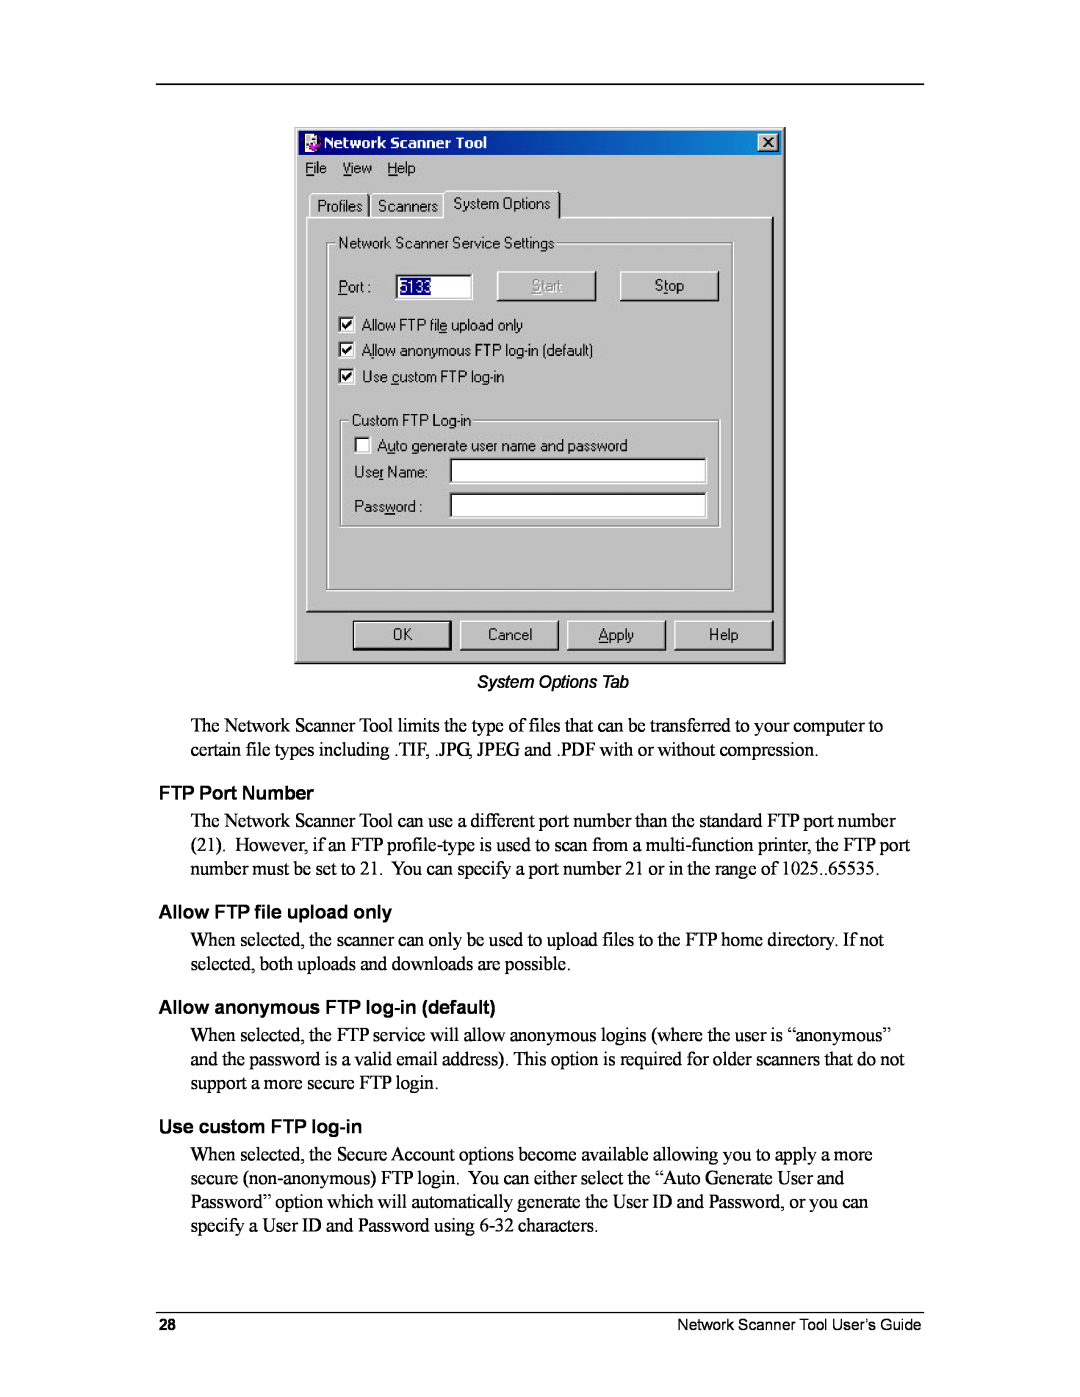 Sharp R3.1 manual FTP Port Number, Allow FTP file upload only, Allow anonymous FTP log-in default, Use custom FTP log-in 